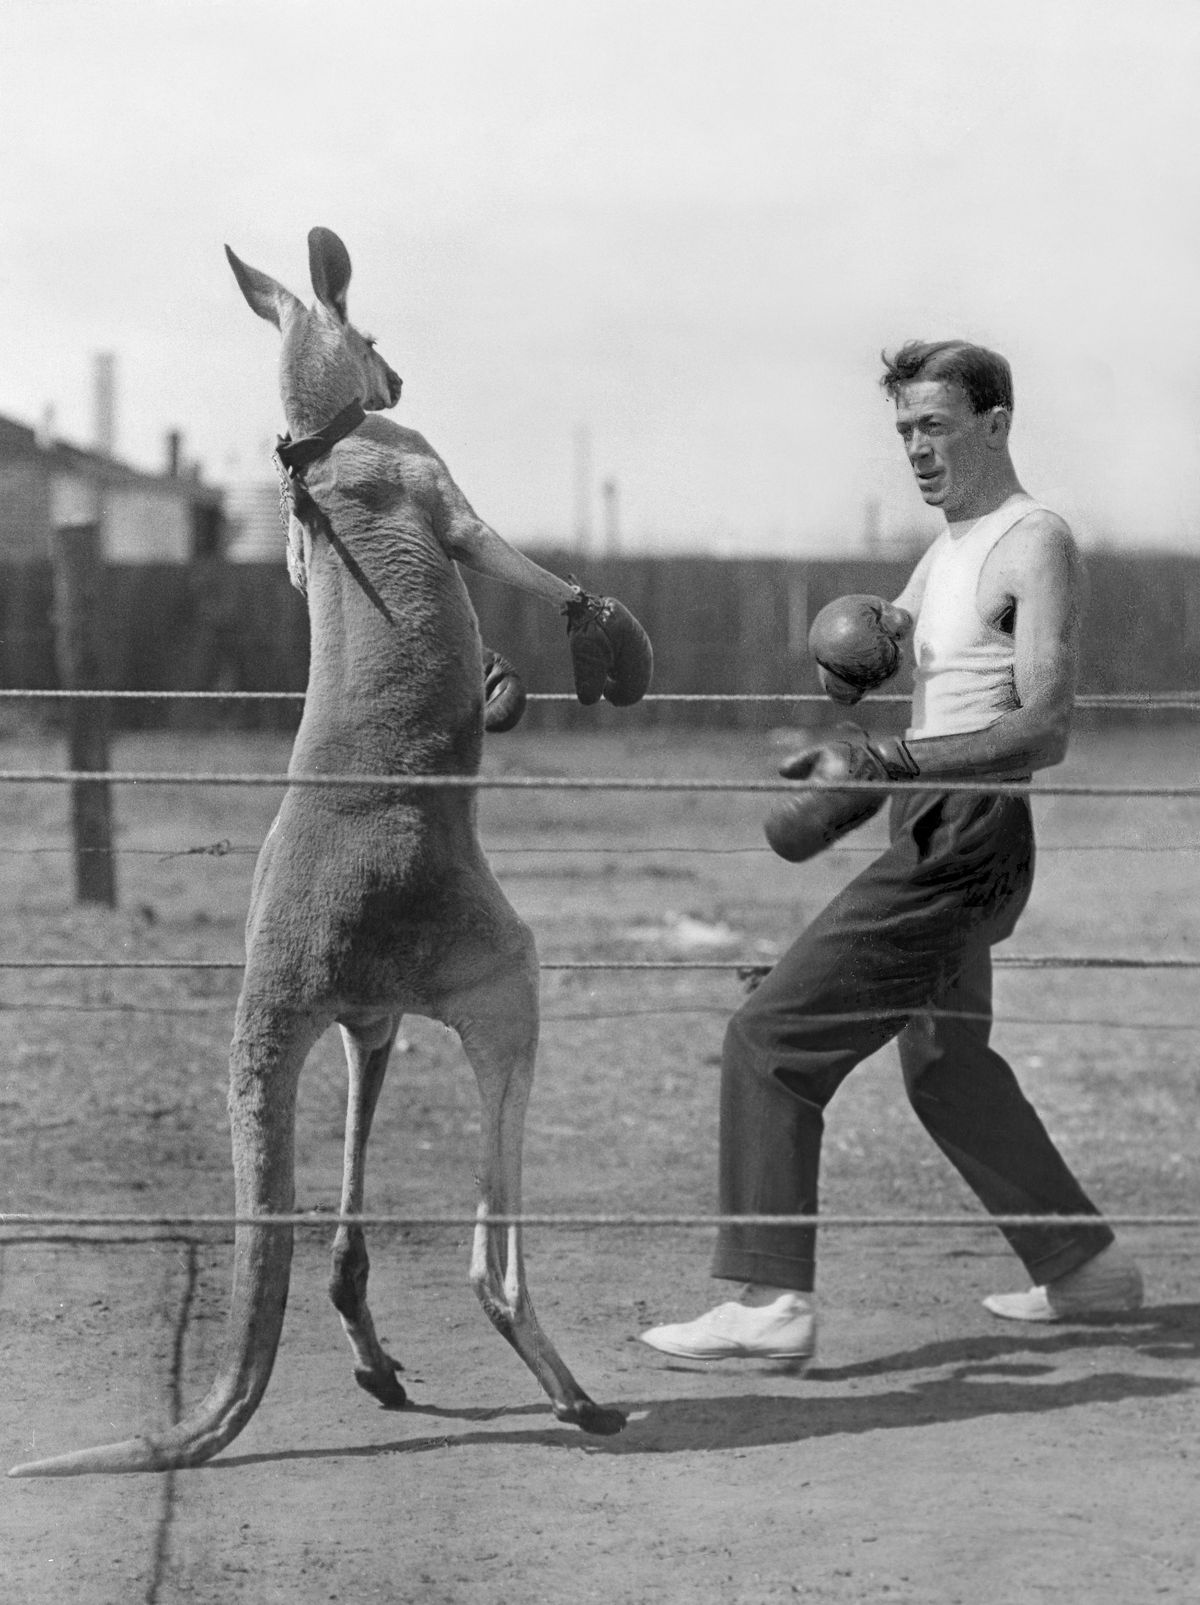 Funny animal pictures Man boxing with kangaroo ‘Aussie’ (number in a variety show in Berlin) - 1924 - Vintage property of ullstein bild